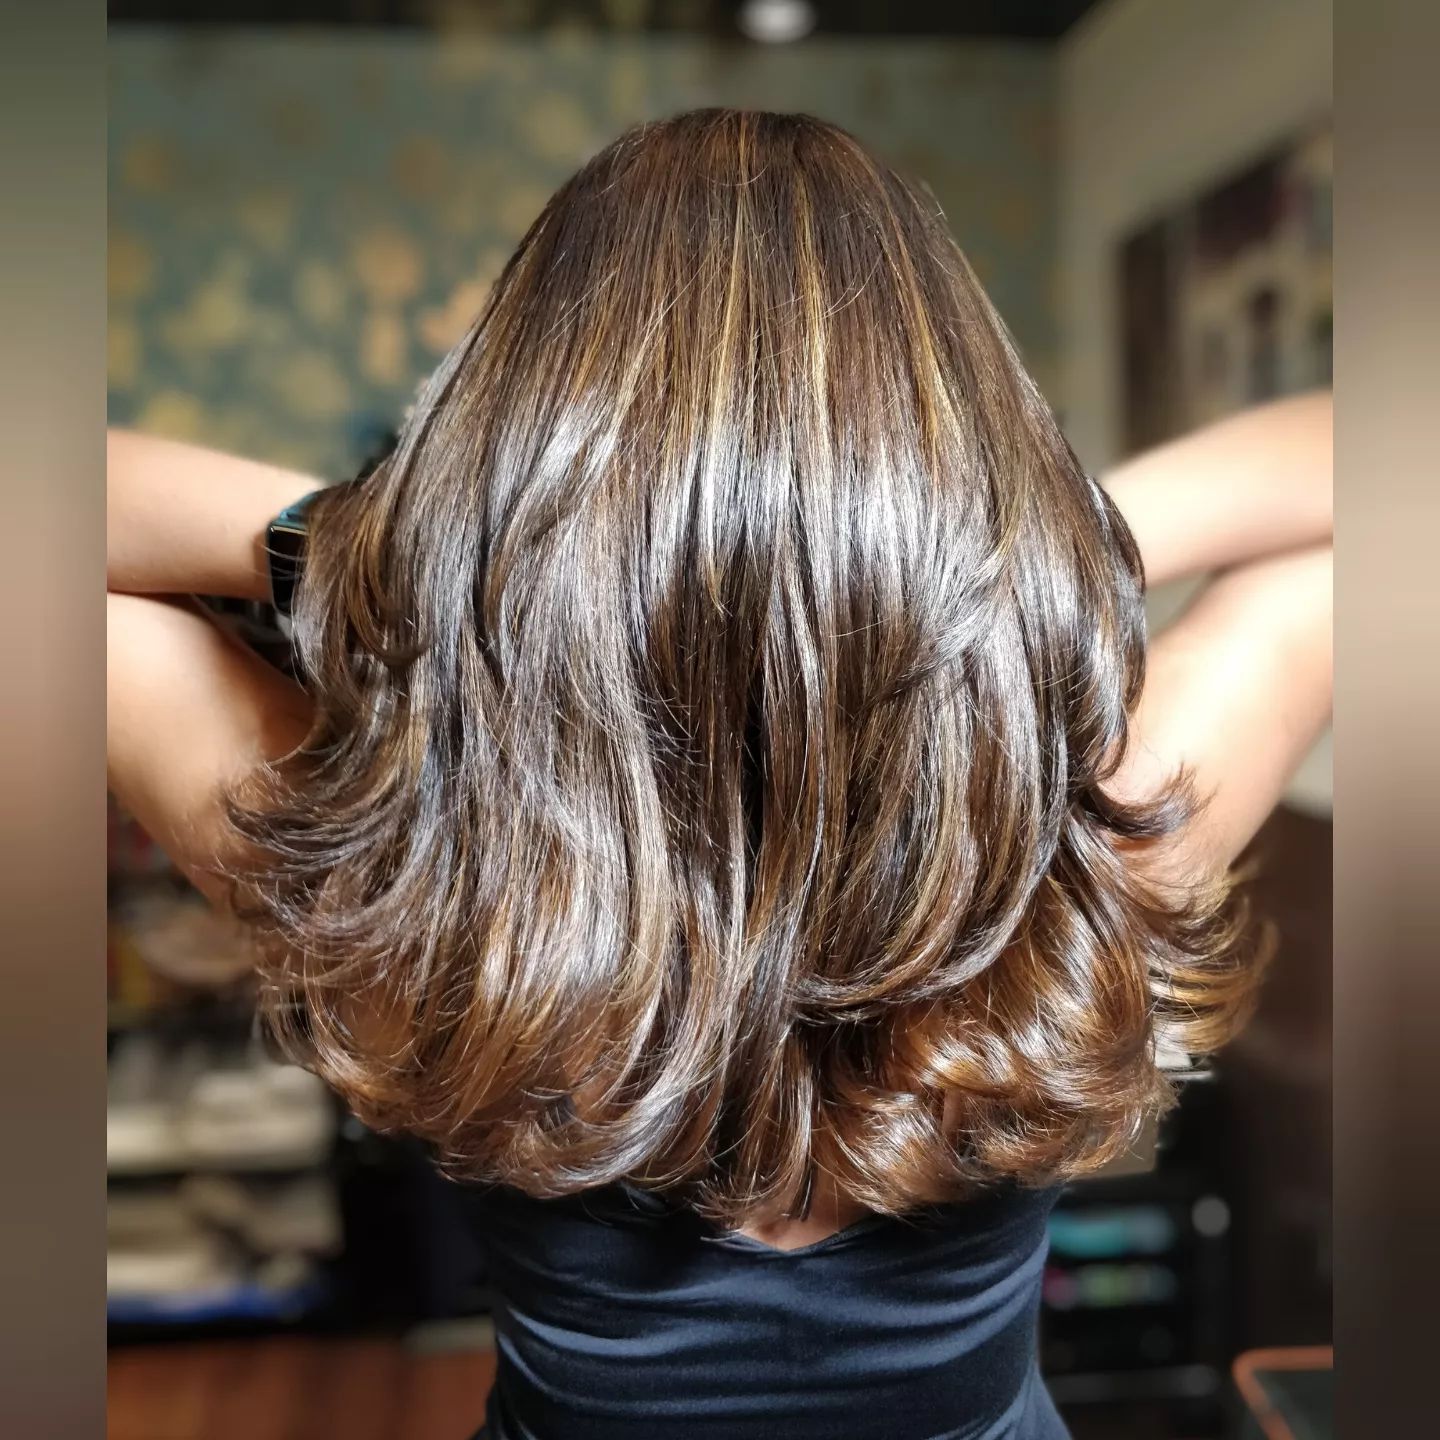 Hair Color for Indian Skin Tone 308 hair care routine | hair color | hair colors for Indian skin tone Hair Color for Indian Skin Tones